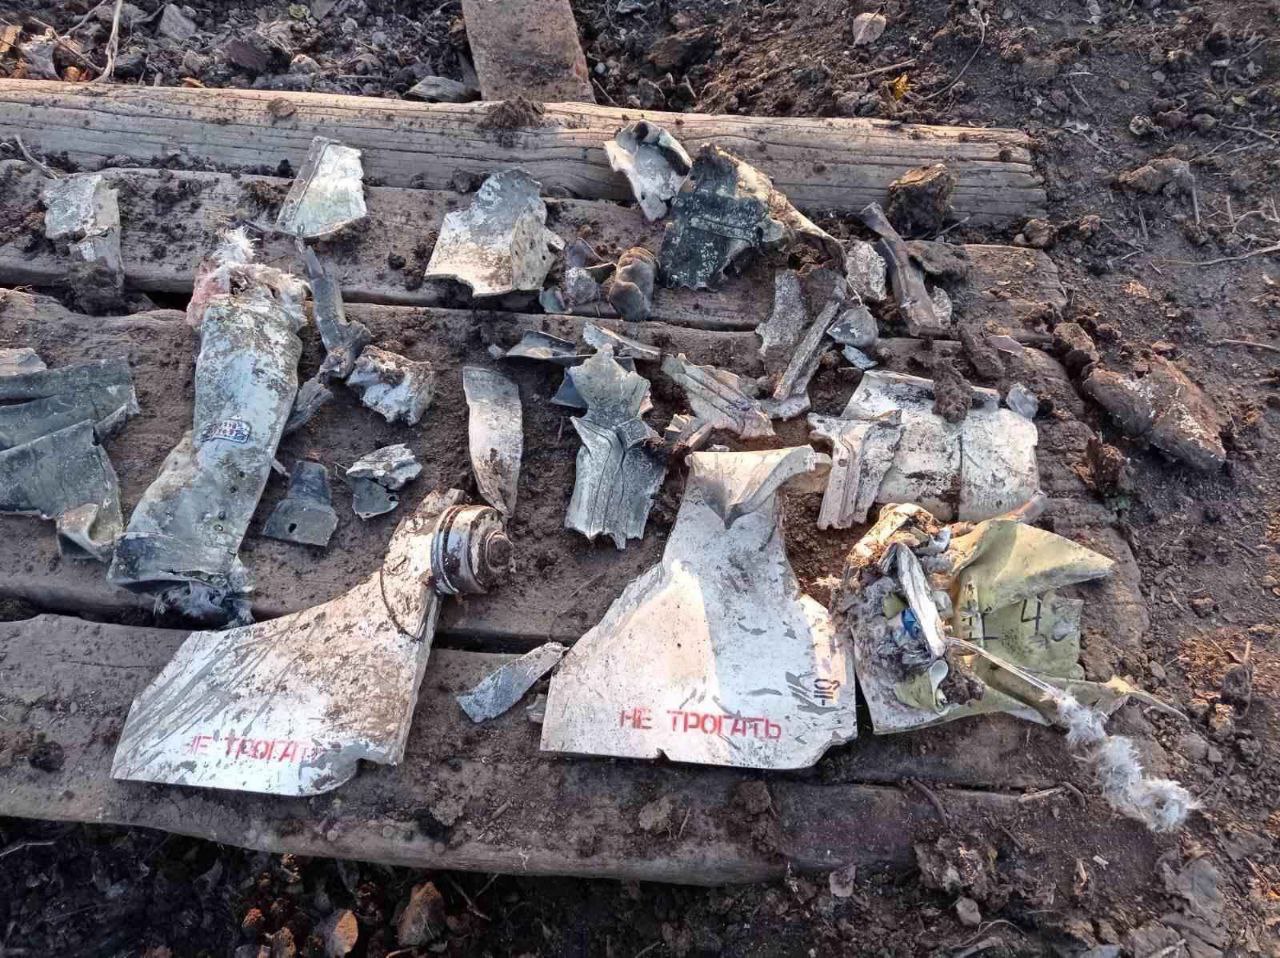 The debris of the Russian Kh-29 missile that blown up an outdoor toilet in Huliaipole, Defense Express